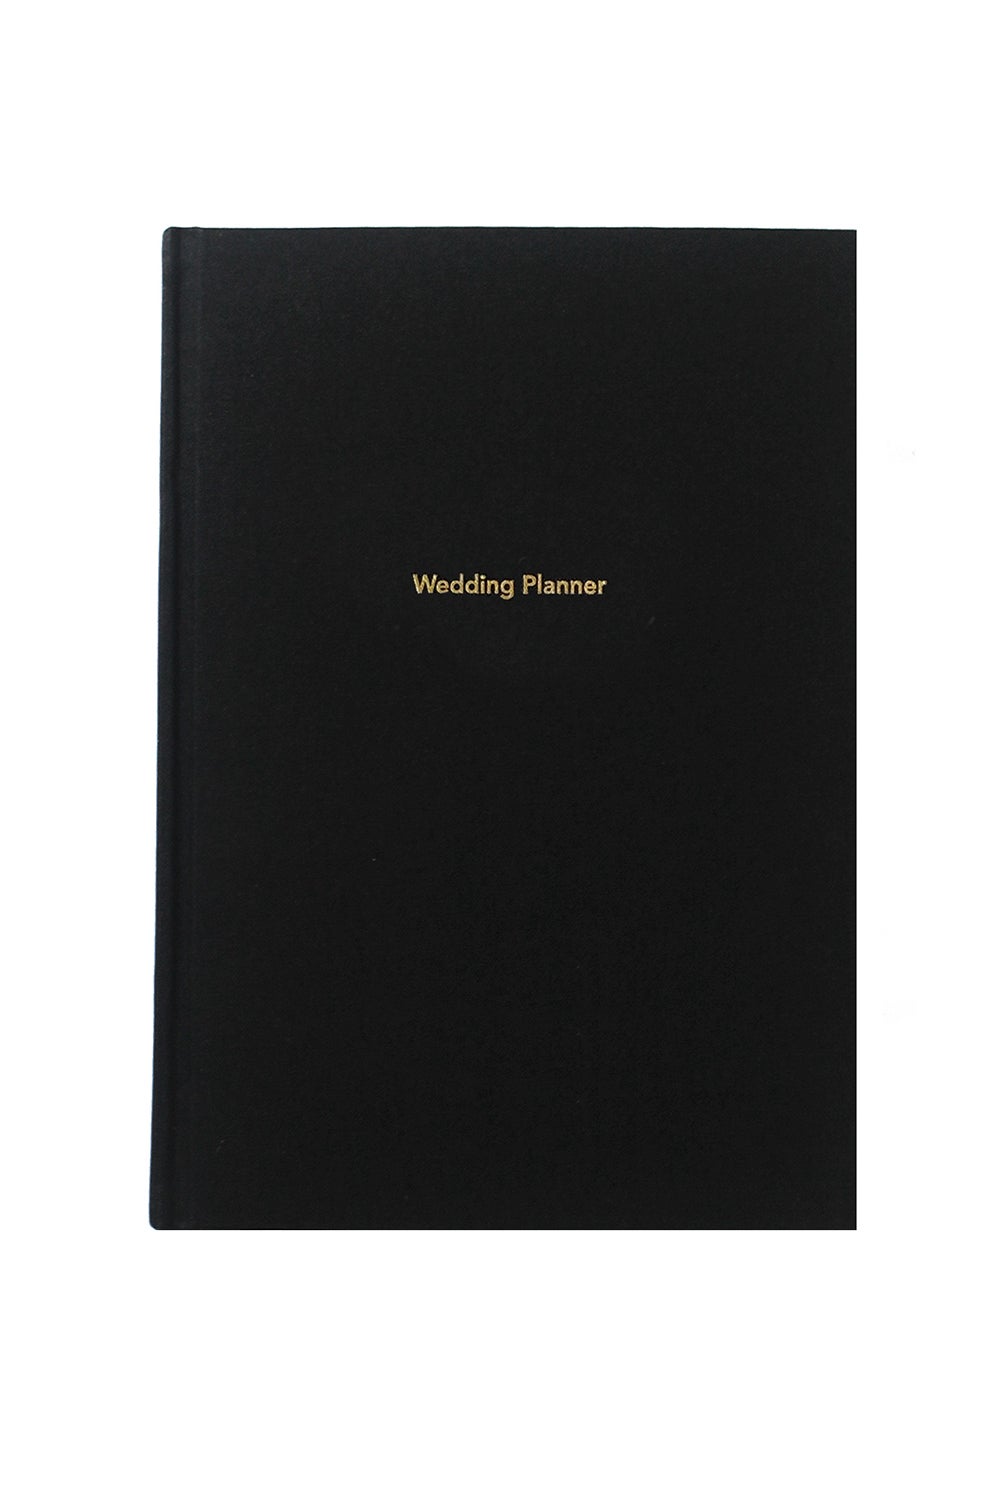 Together Journal x An Organised Life Wedding Planner